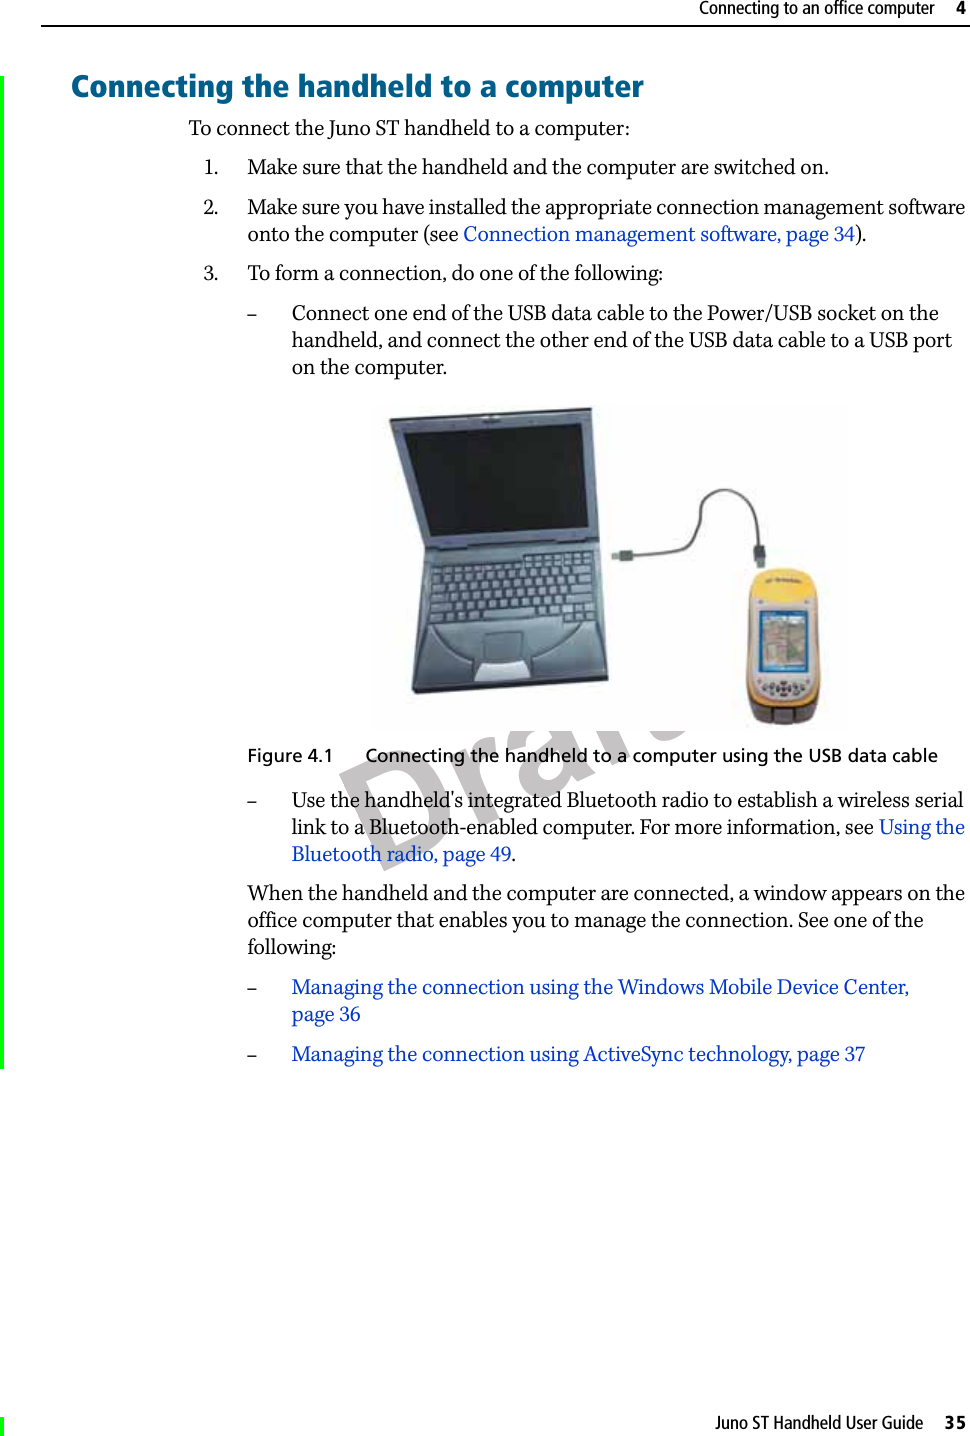 DraftJuno ST Handheld User Guide     35Connecting to an office computer     4Connecting the handheld to a computerTo connect the Juno ST handheld to a computer:1. Make sure that the handheld and the computer are switched on.2. Make sure you have installed the appropriate connection management software onto the computer (see Connection management software, page 34). 3. To form a connection, do one of the following:–Connect one end of the USB data cable to the Power/USB socket on the handheld, and connect the other end of the USB data cable to a USB port on the computer. Figure 4.1 Connecting the handheld to a computer using the USB data cable–Use the handheld&apos;s integrated Bluetooth radio to establish a wireless serial link to a Bluetooth-enabled computer. For more information, see Using the Bluetooth radio, page 49.When the handheld and the computer are connected, a window appears on the office computer that enables you to manage the connection. See one of the following: –Managing the connection using the Windows Mobile Device Center, page 36–Managing the connection using ActiveSync technology, page 37